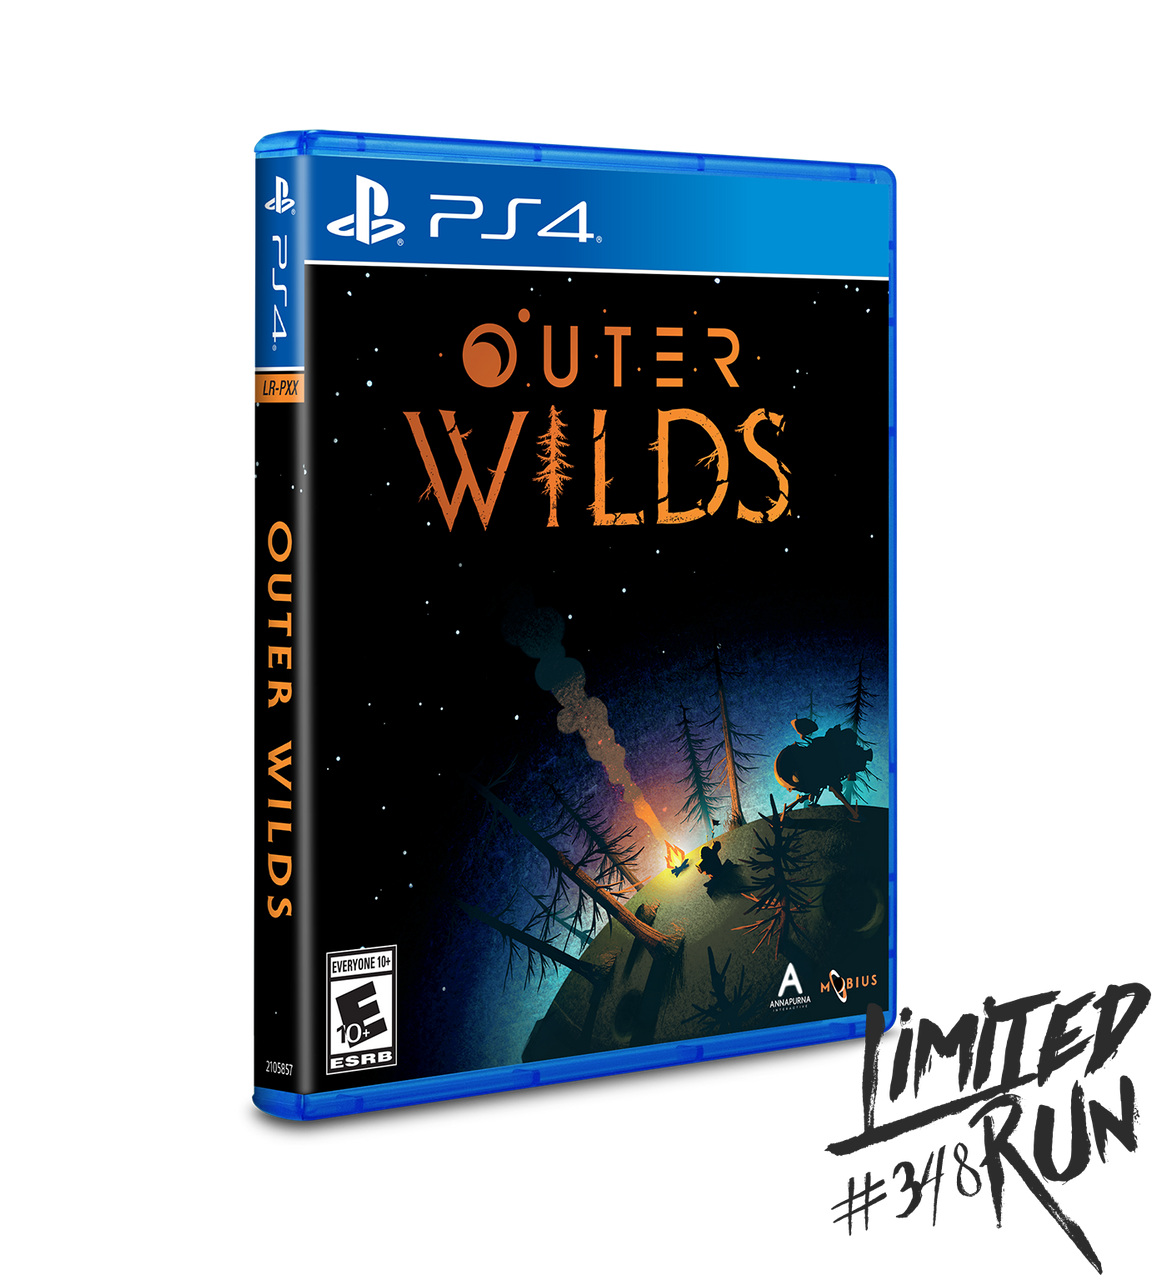 Wild ps4. Outer Wilds ps4 диск. Outer Wilds обложка. Outer Wilds ps4 диск Обратная сторона. Outer Wilds отзывы.